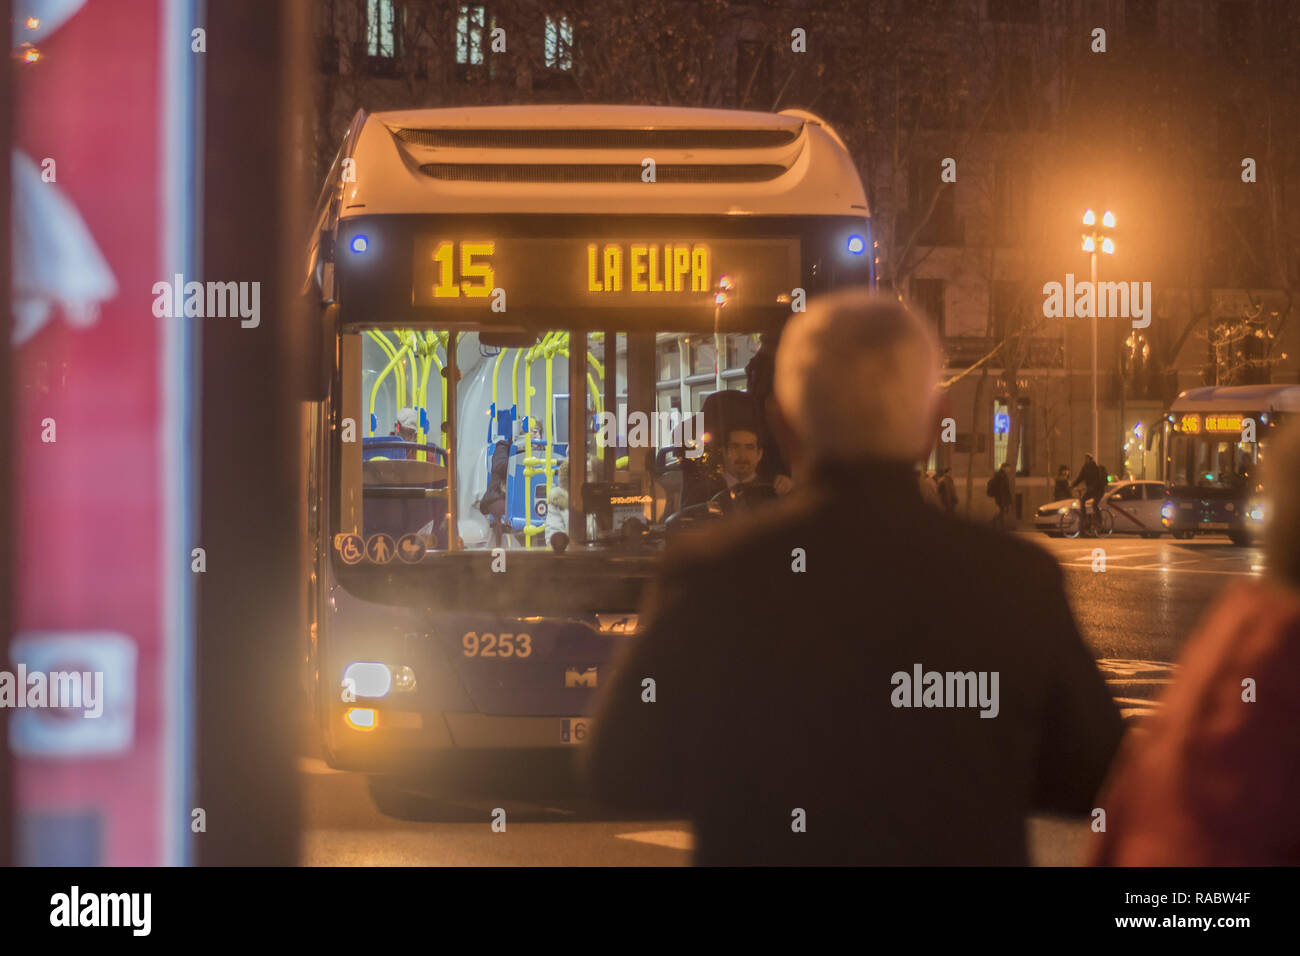 January 3, 2019 - Madrid, Madrid, Spain - A passenger seen waiting for a bus..The EMT transport of Madrid, transported more than 420 million users in 2018. As reported by the Consistory, for months, the record of travelers was broken in October, with 40.5 million users. In 2018, EMT transported 442,000 passengers in the Substitute Subway Special Services provided in summer by partial cuts on line 9, compared to 10.16 million in 2017. (Credit Image: © Alberto Sibaja/SOPA Images via ZUMA Wire) Stock Photo